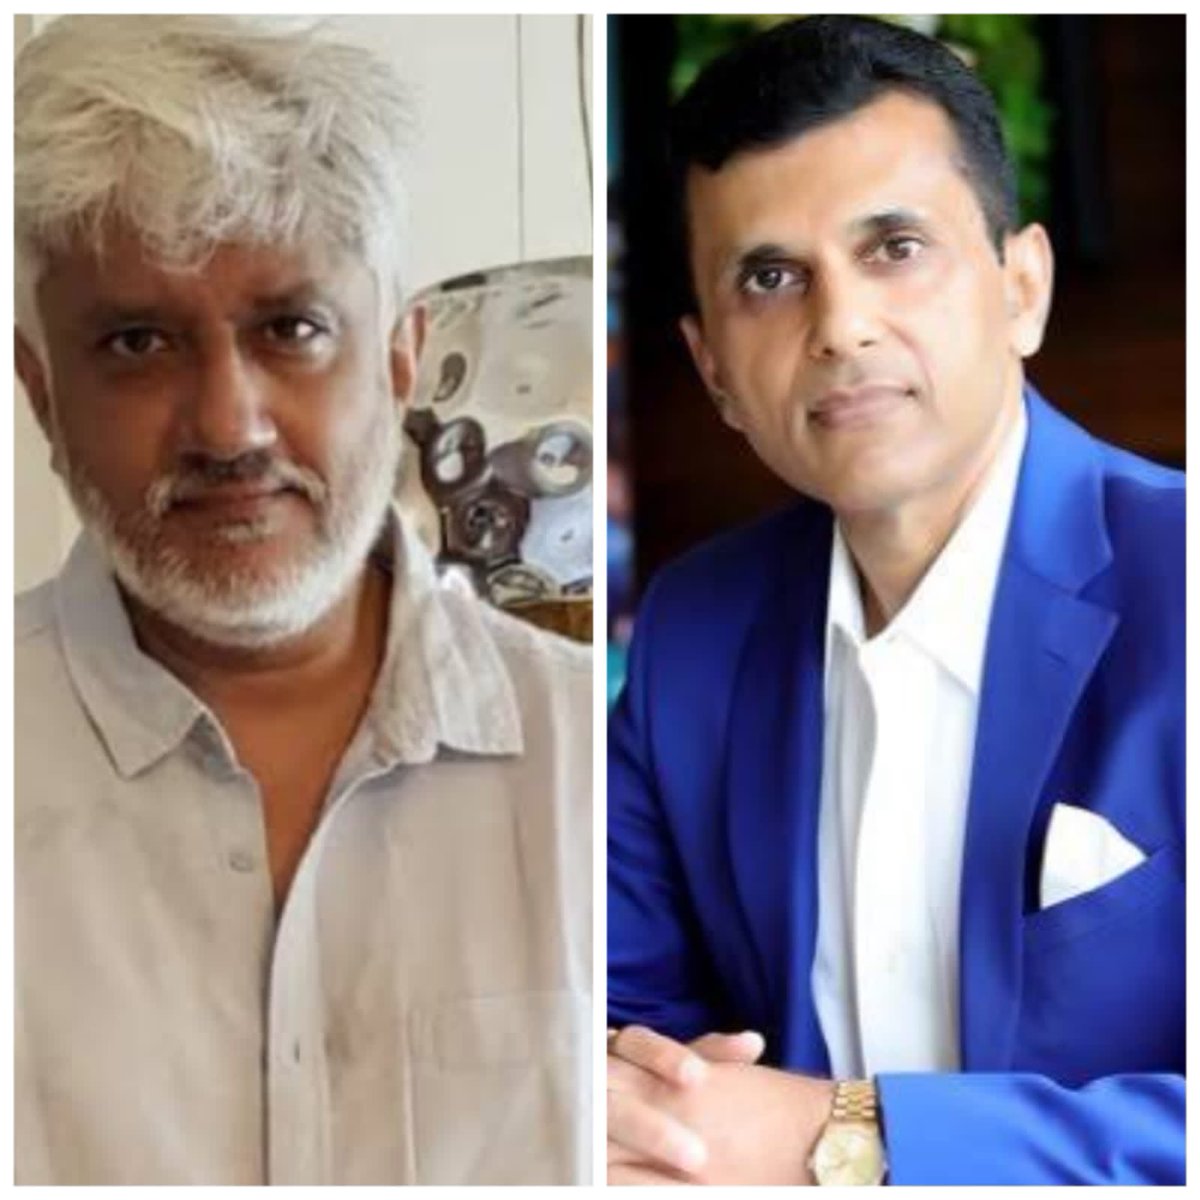 MAHESH BHATT - ANAND PANDIT - VIKRAM BHATT COLLABORATE FOR ‘HAUNTED’… After the successful collaboration of #1920HorrorsOfTheHeart, #MaheshBhatt, #AnandPandit and #VikramBhatt reunite for #Haunted: Ghosts Of The Past.

Produced by Anand Pandit, M Ramesh, Rakesh Juneja and